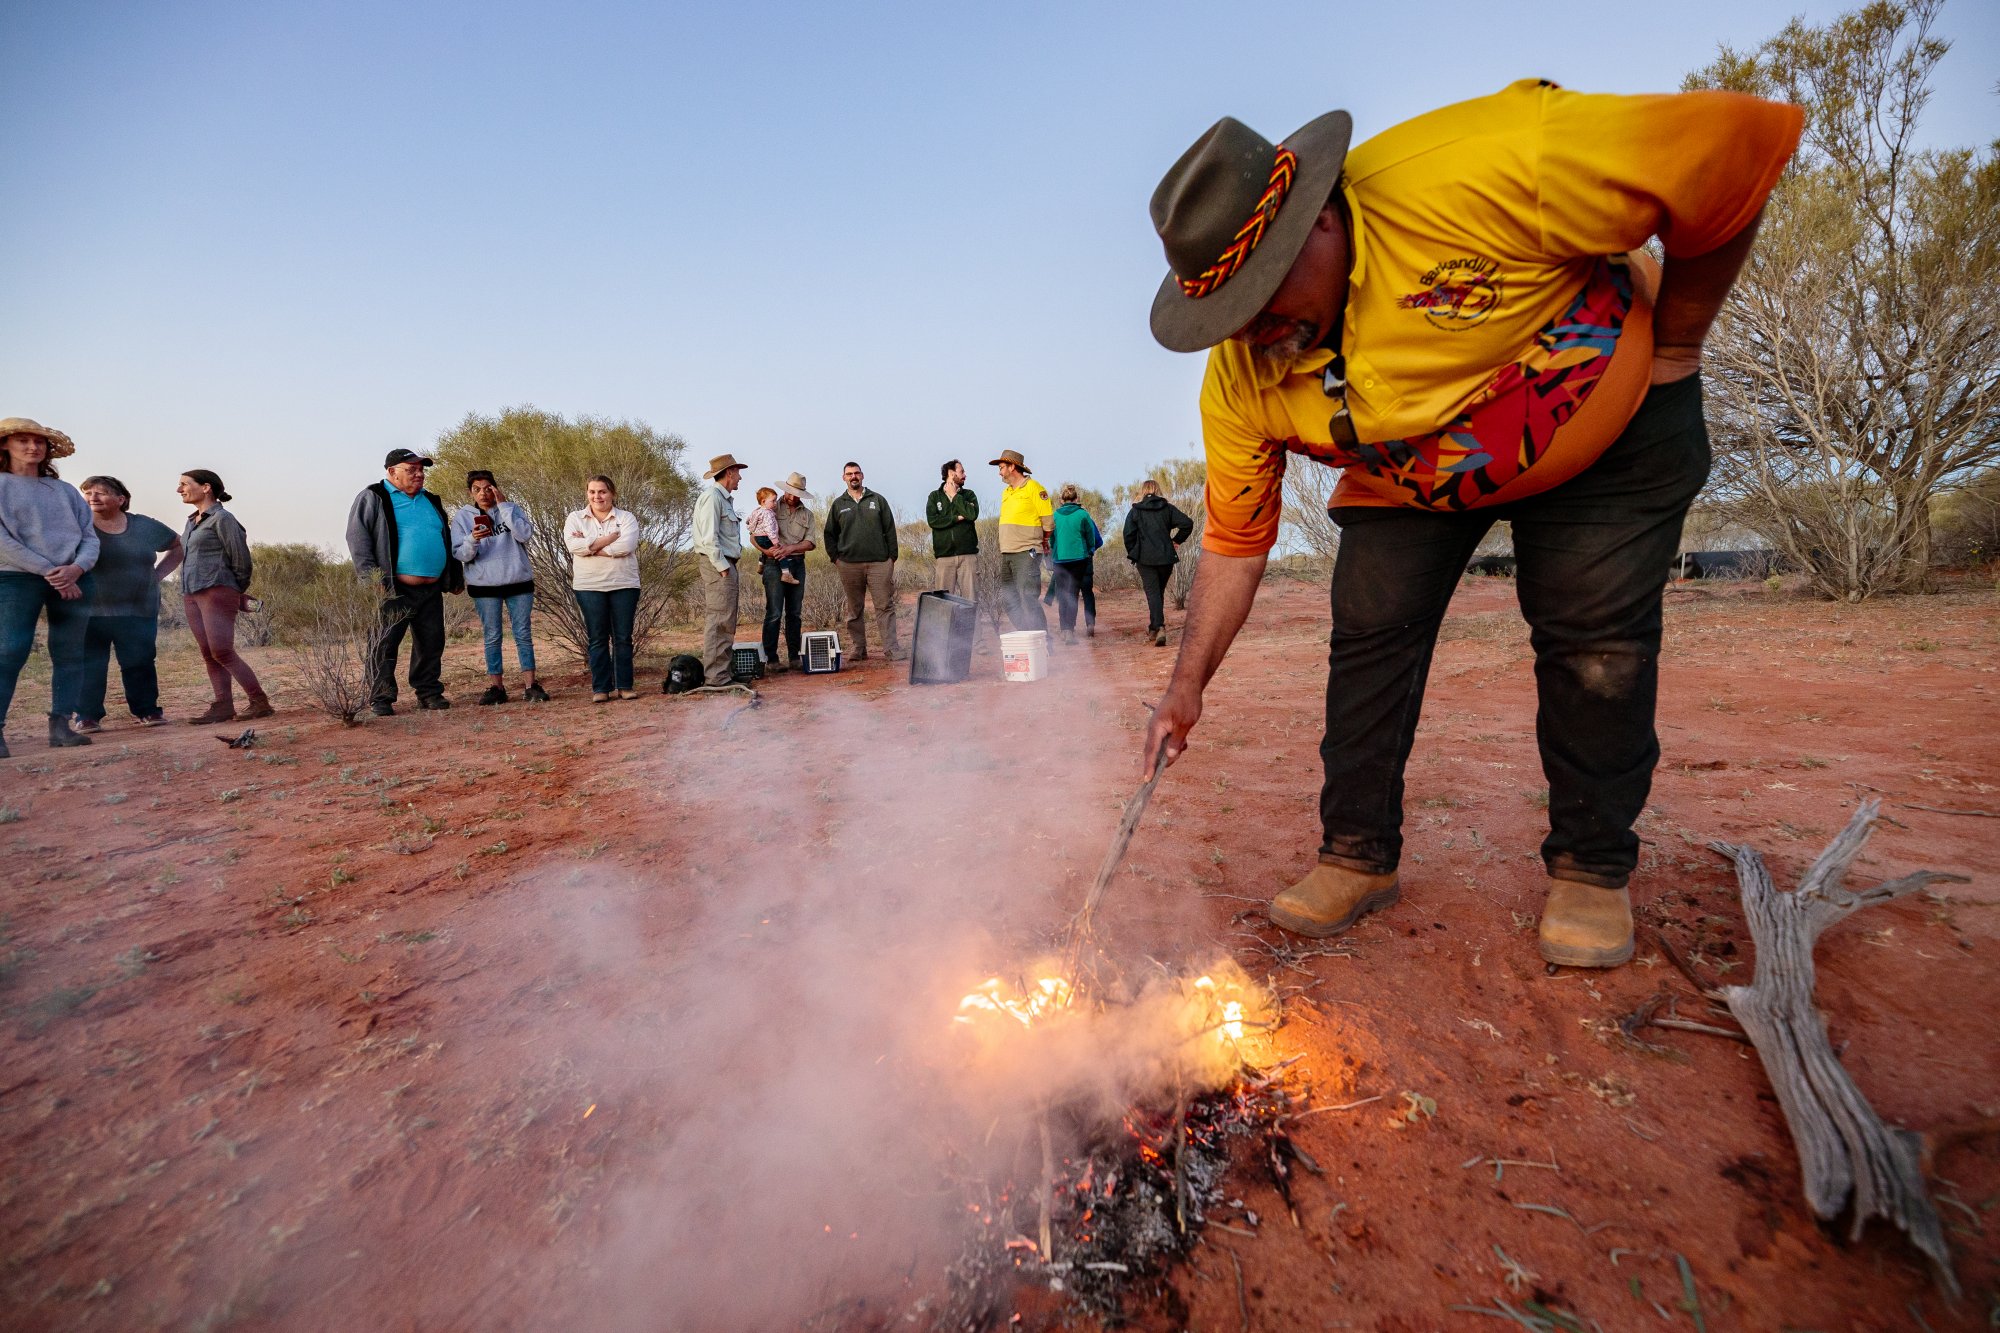 Smoking ceremony prior to the bilbies being released